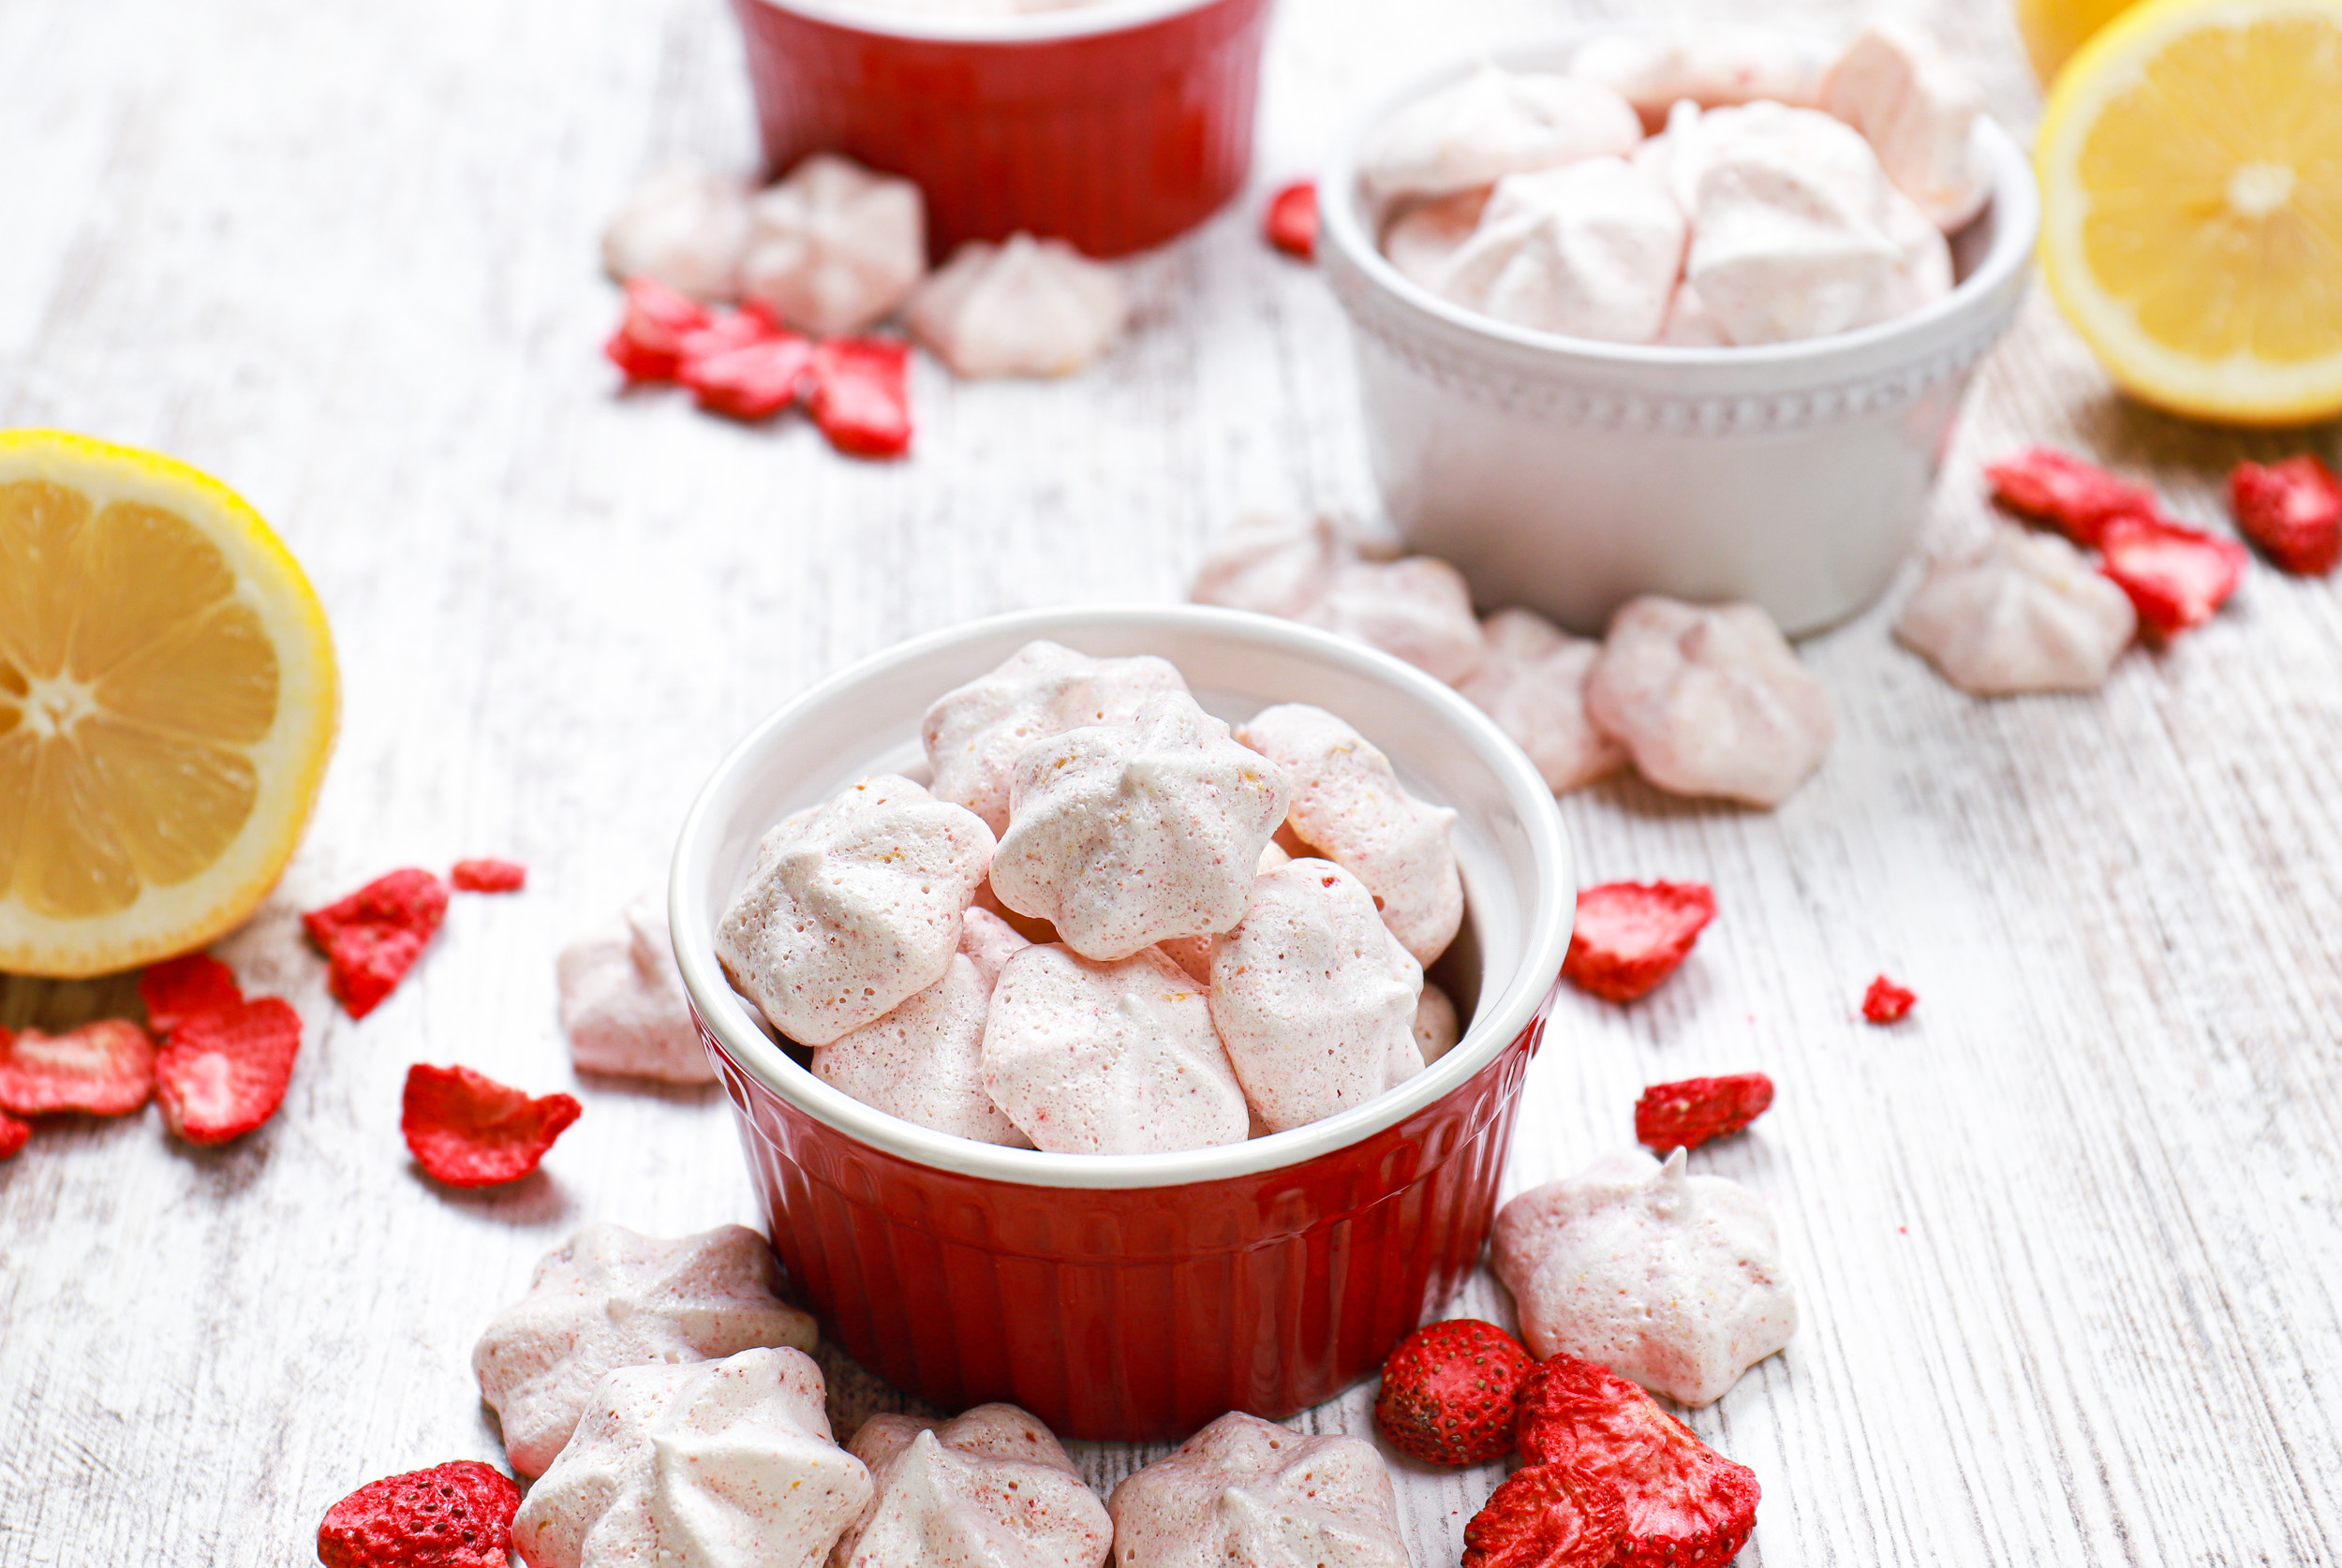 Strawberry lemon mini meringue cookies in a small red bowl surrounded by more cookies and freeze-dried strawberries.